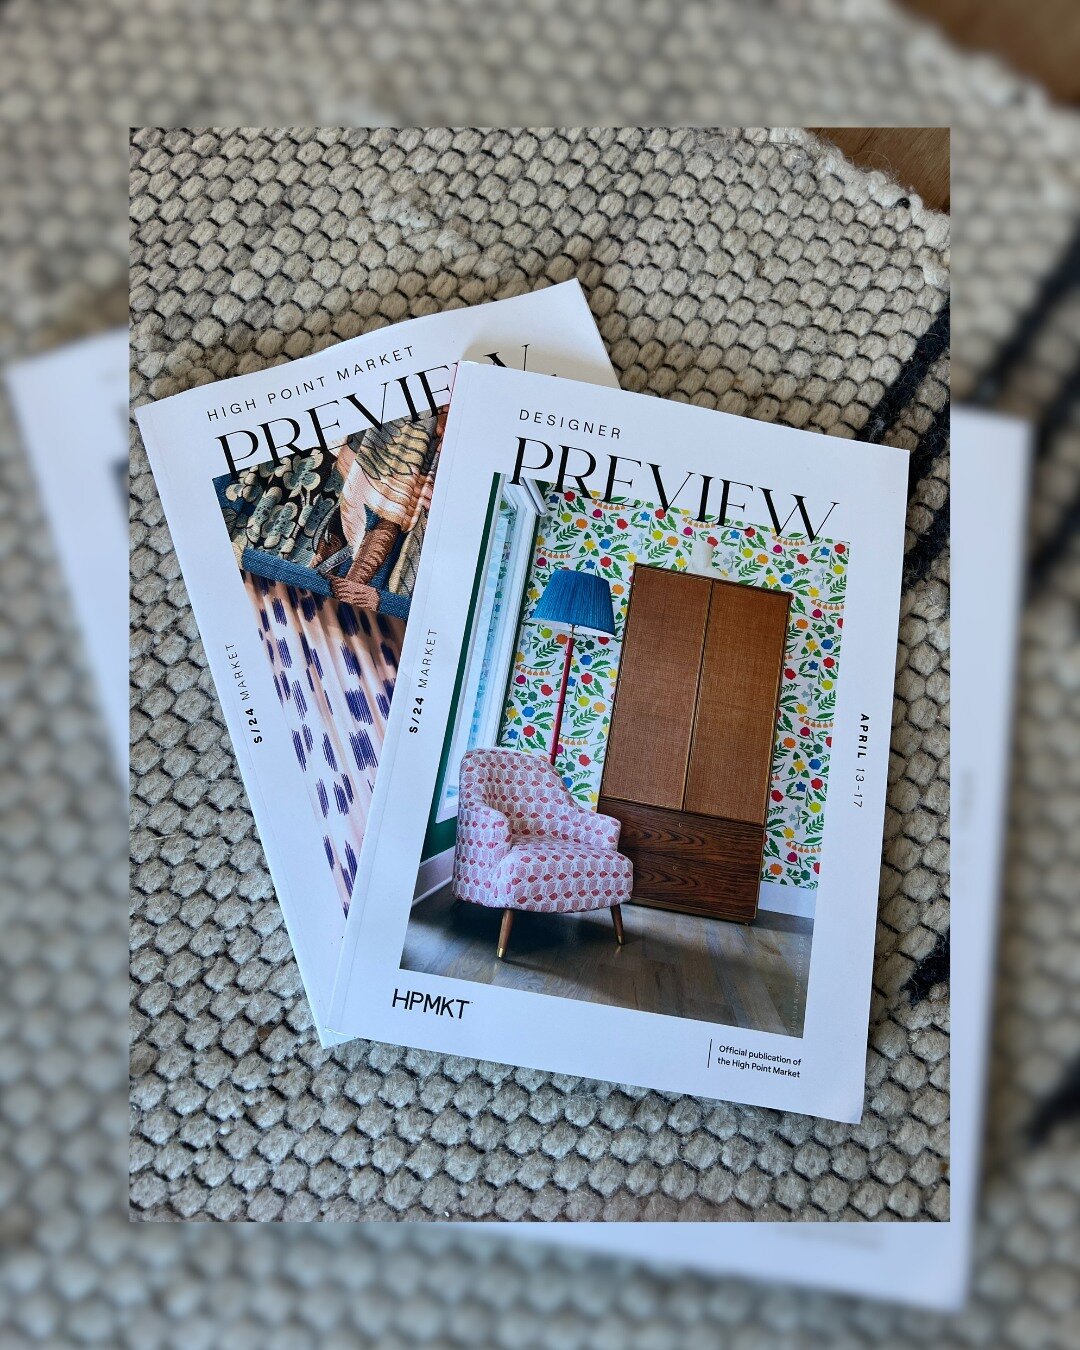 Spring is in the air... and being delivered to my mailbox! ️

The High Point Market Spring 2024 preview catalogs have arrived, and I'm buzzing with anticipation! So much incredible inspiration waiting to be discovered.

Are you attending High Point M